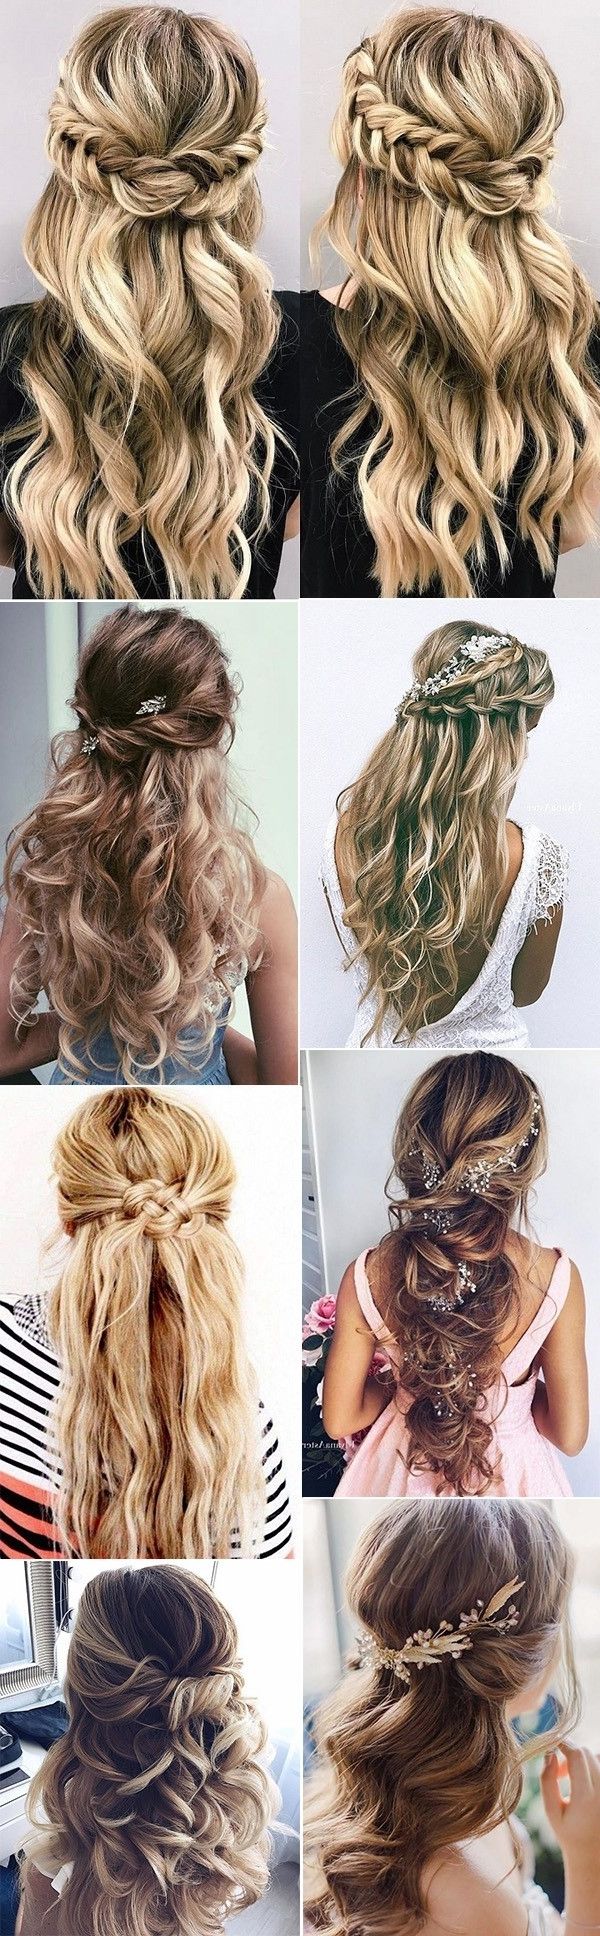 Most Recently Released Half Up Half Down Wedding Hairstyles For Long Hair Inside 15 Chic Half Up Half Down Wedding Hairstyles For Long Hair (View 1 of 15)